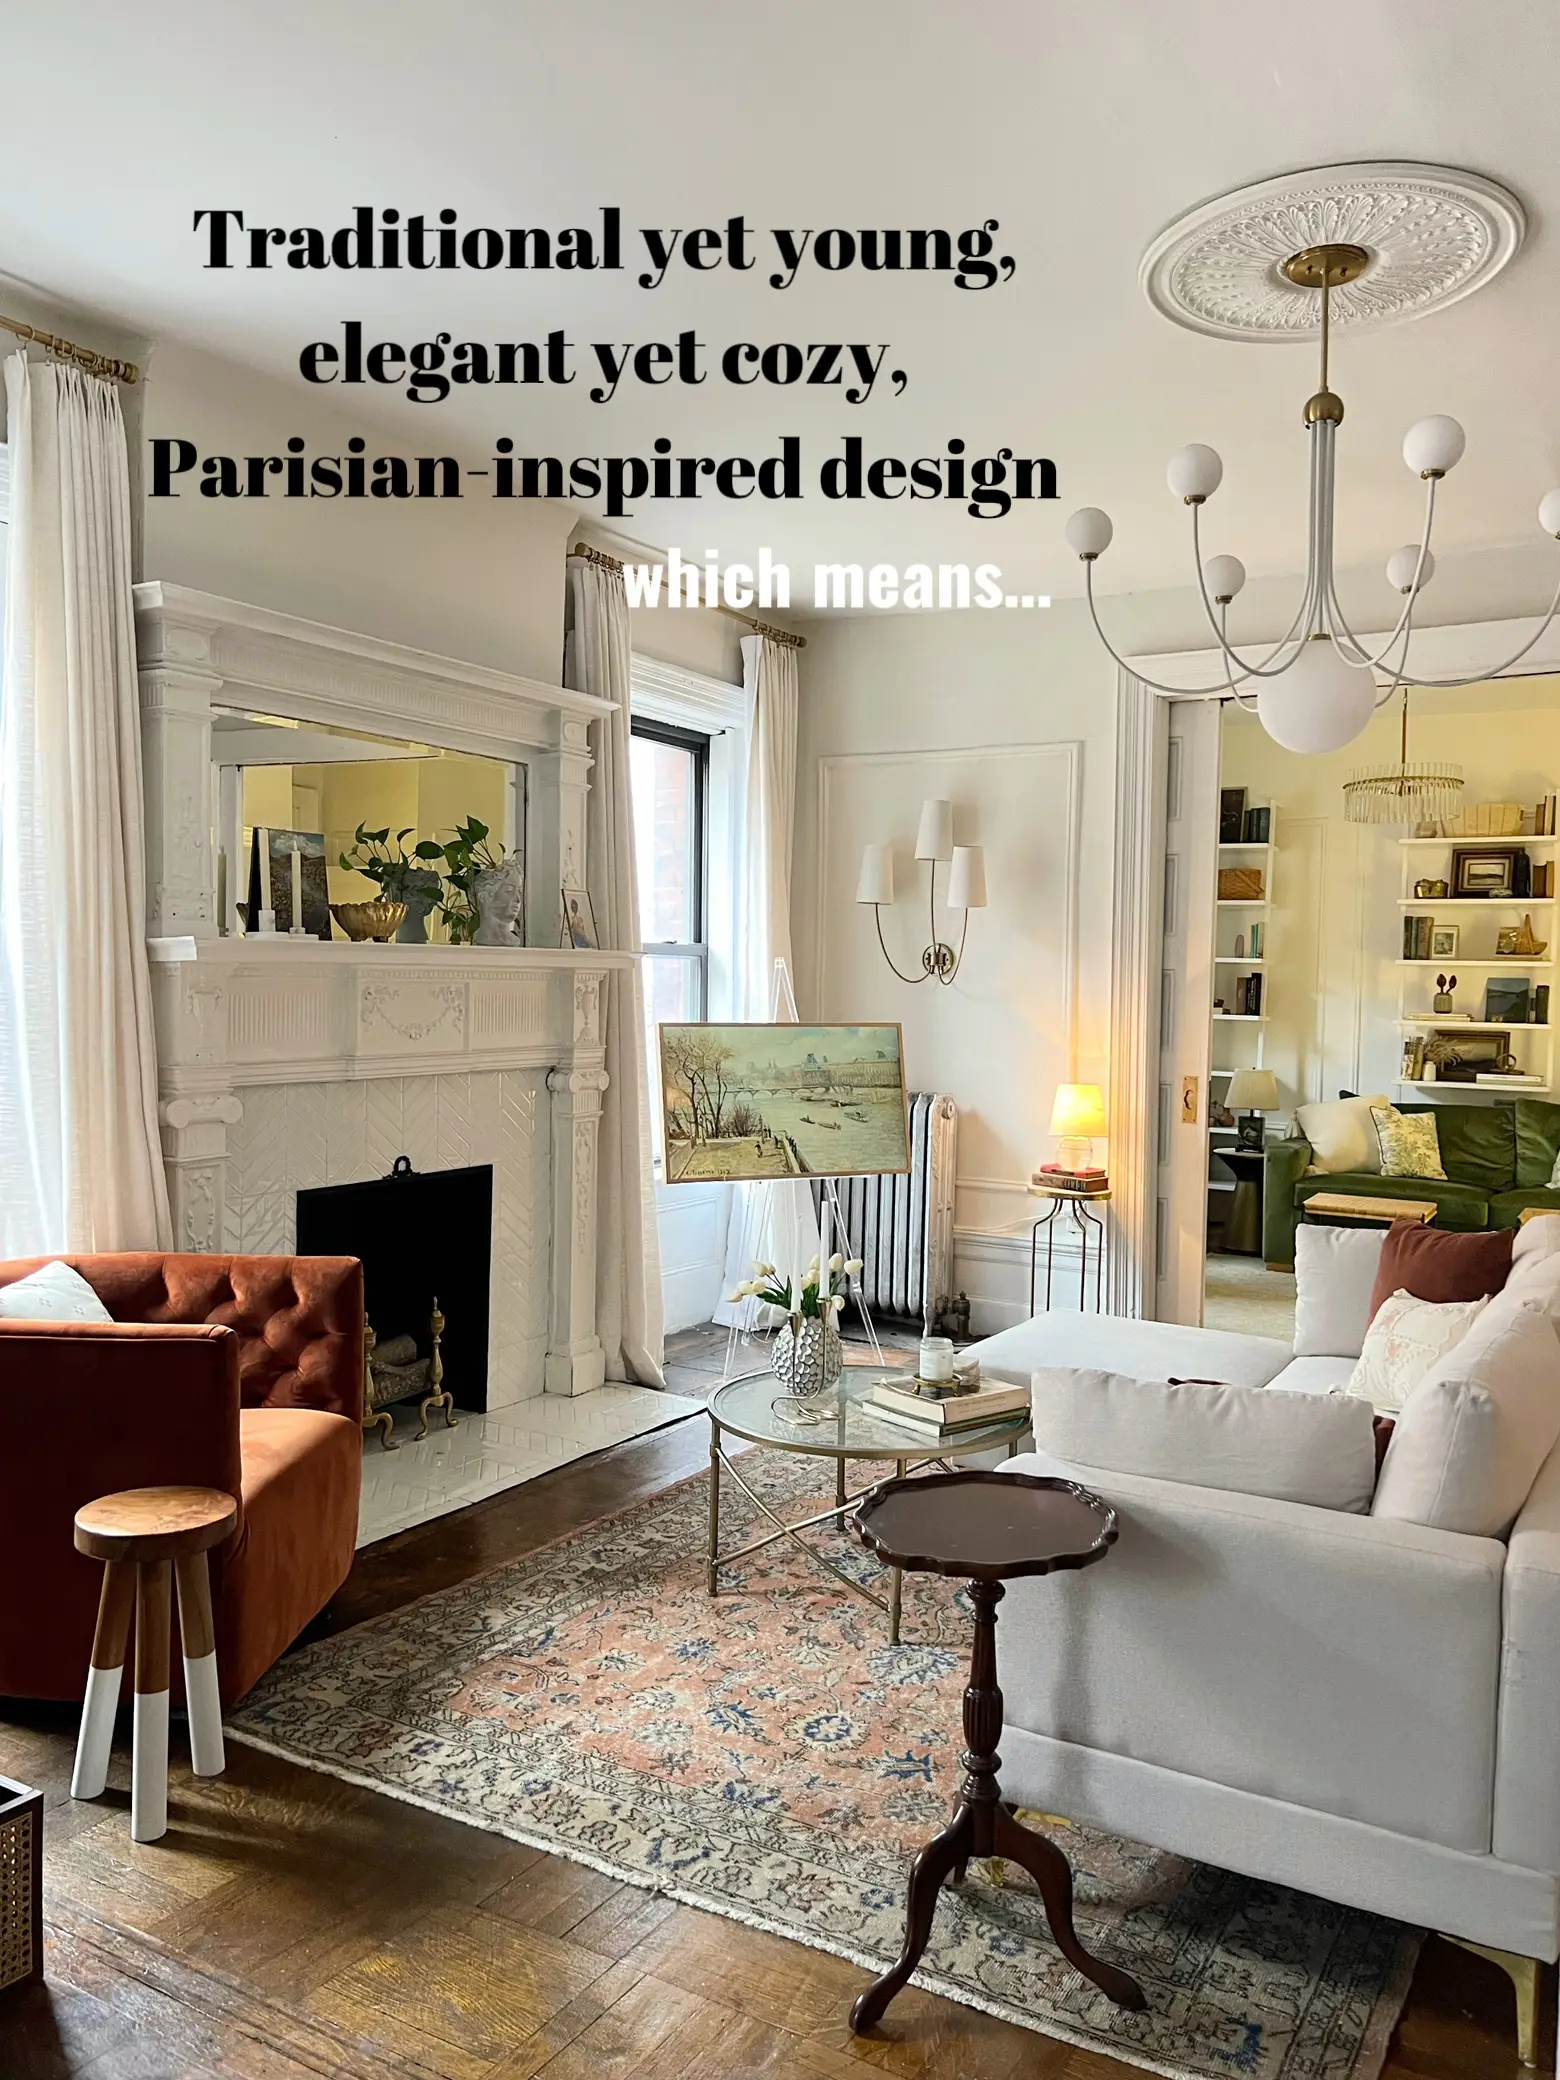 Who else loves old homes & Parisian style decor?!